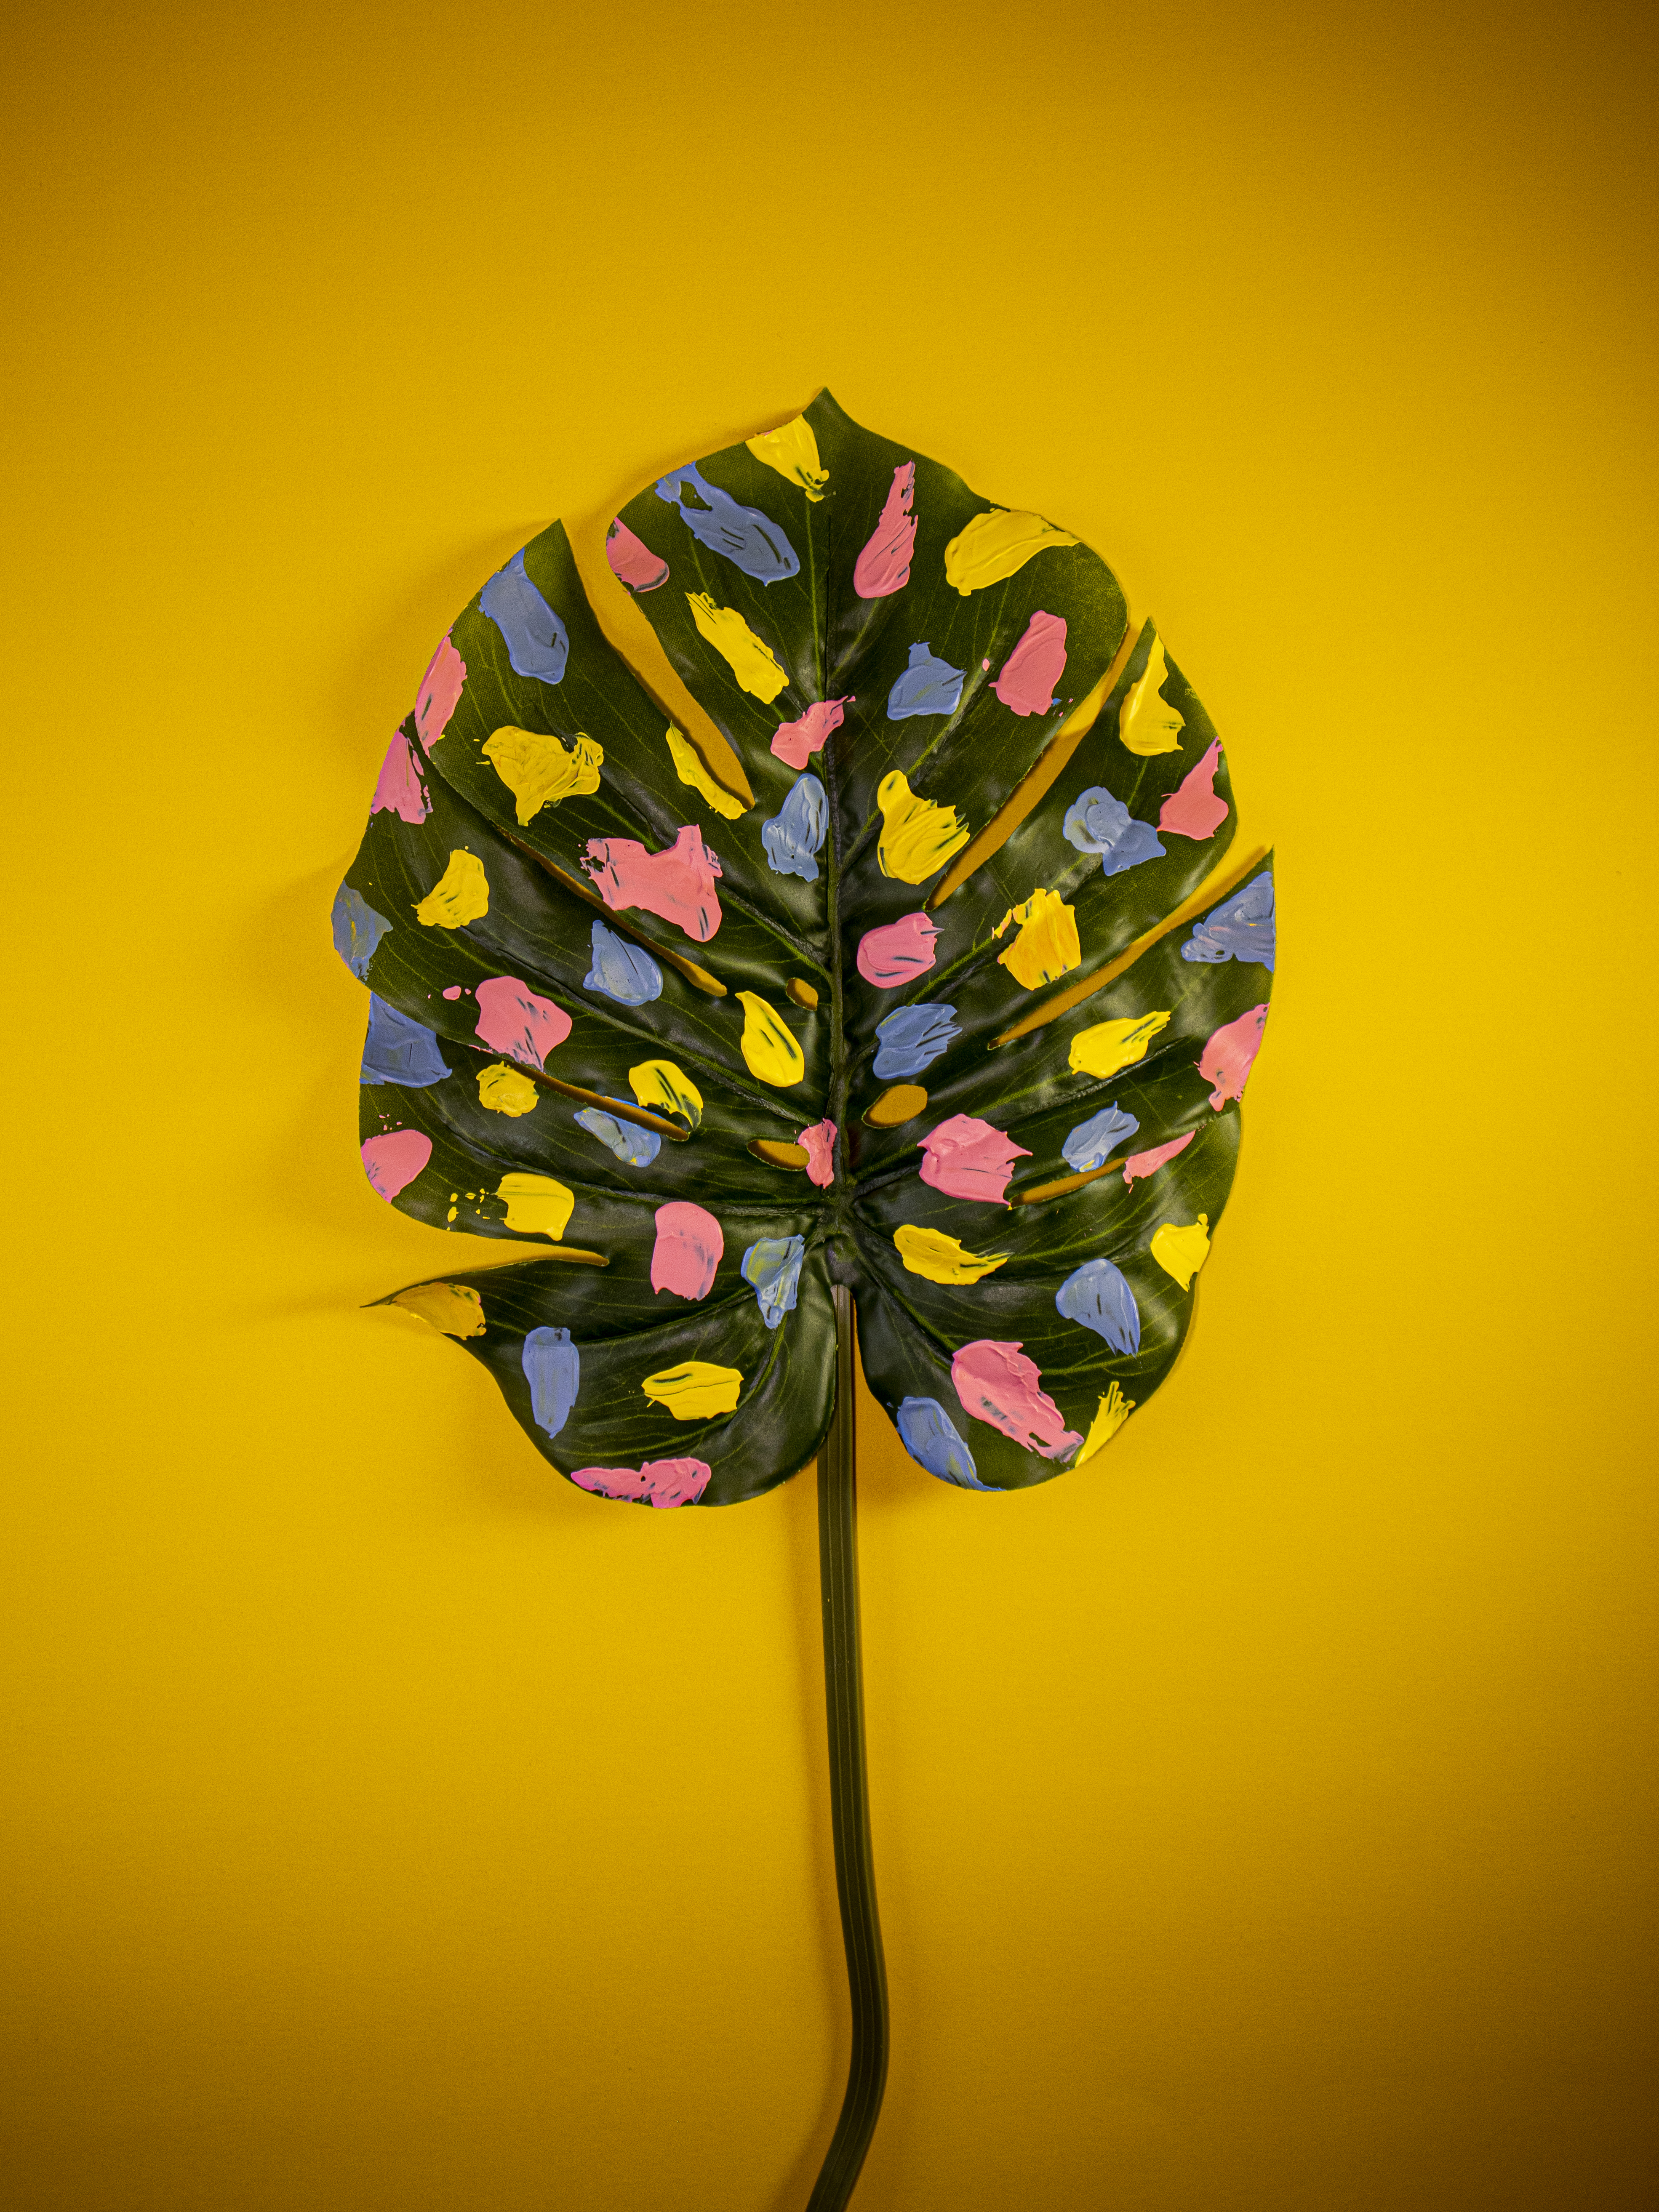 green leaf with pink, yellow and blue splats of paint on leaf with yellow background